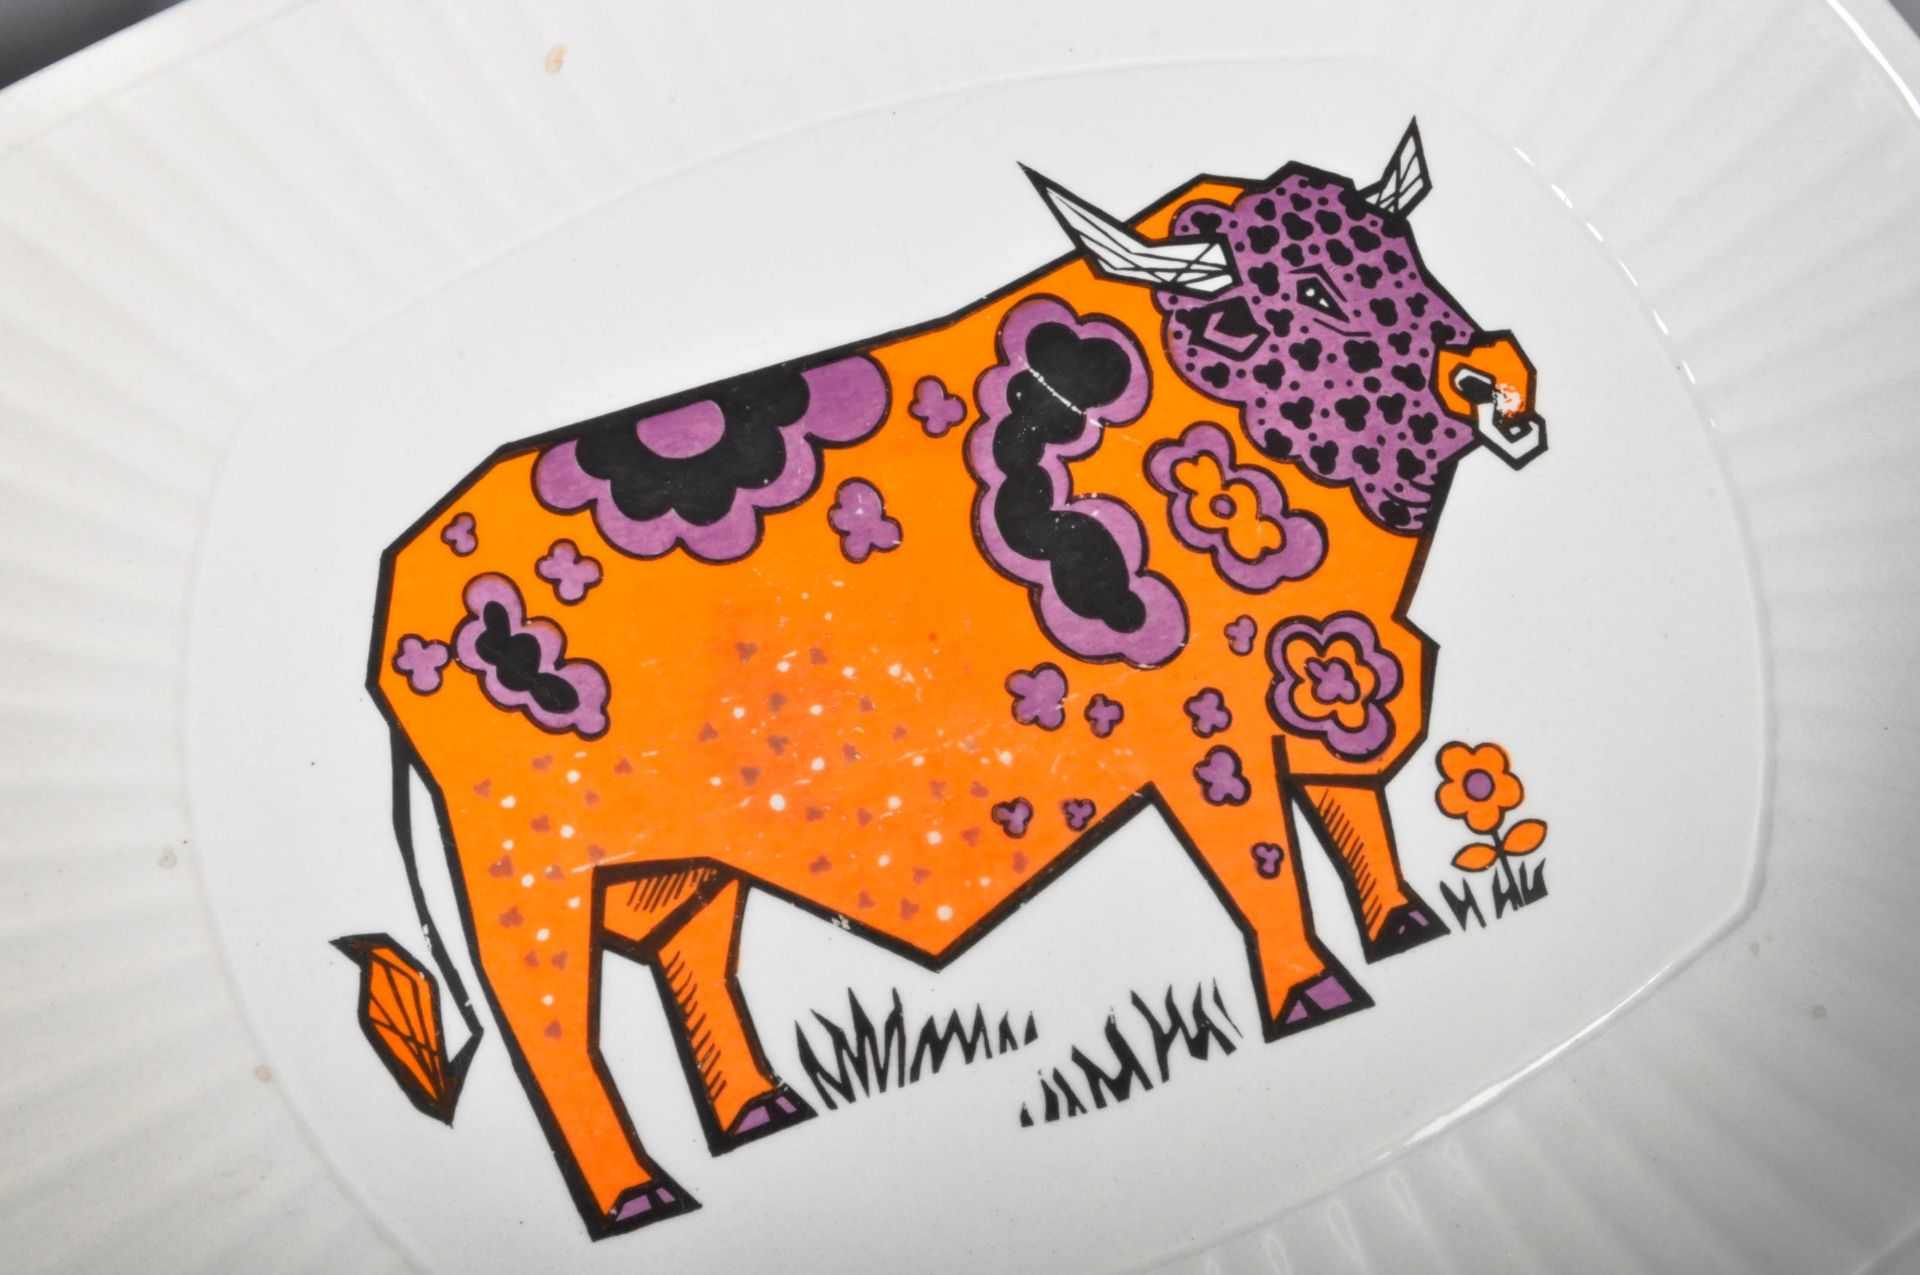 SET OF 1970'S PSYCHEDELIC BEEFEATER COW PLATES - Image 6 of 8